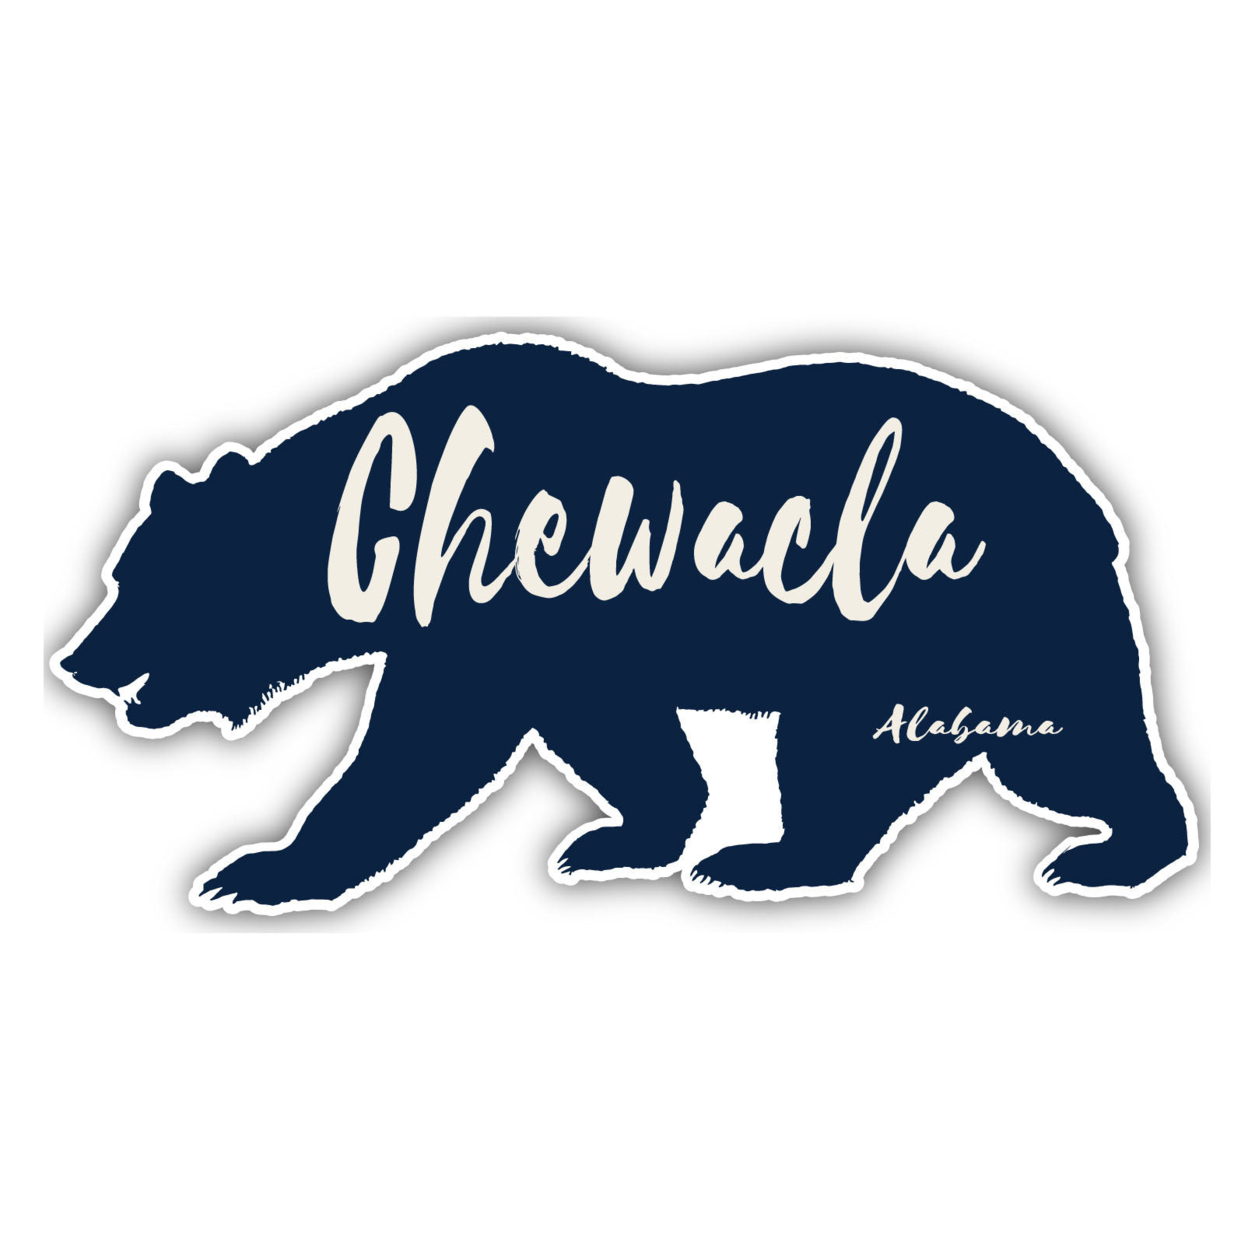 Chewacla Alabama Souvenir Decorative Stickers (Choose Theme And Size) - 4-Pack, 10-Inch, Bear